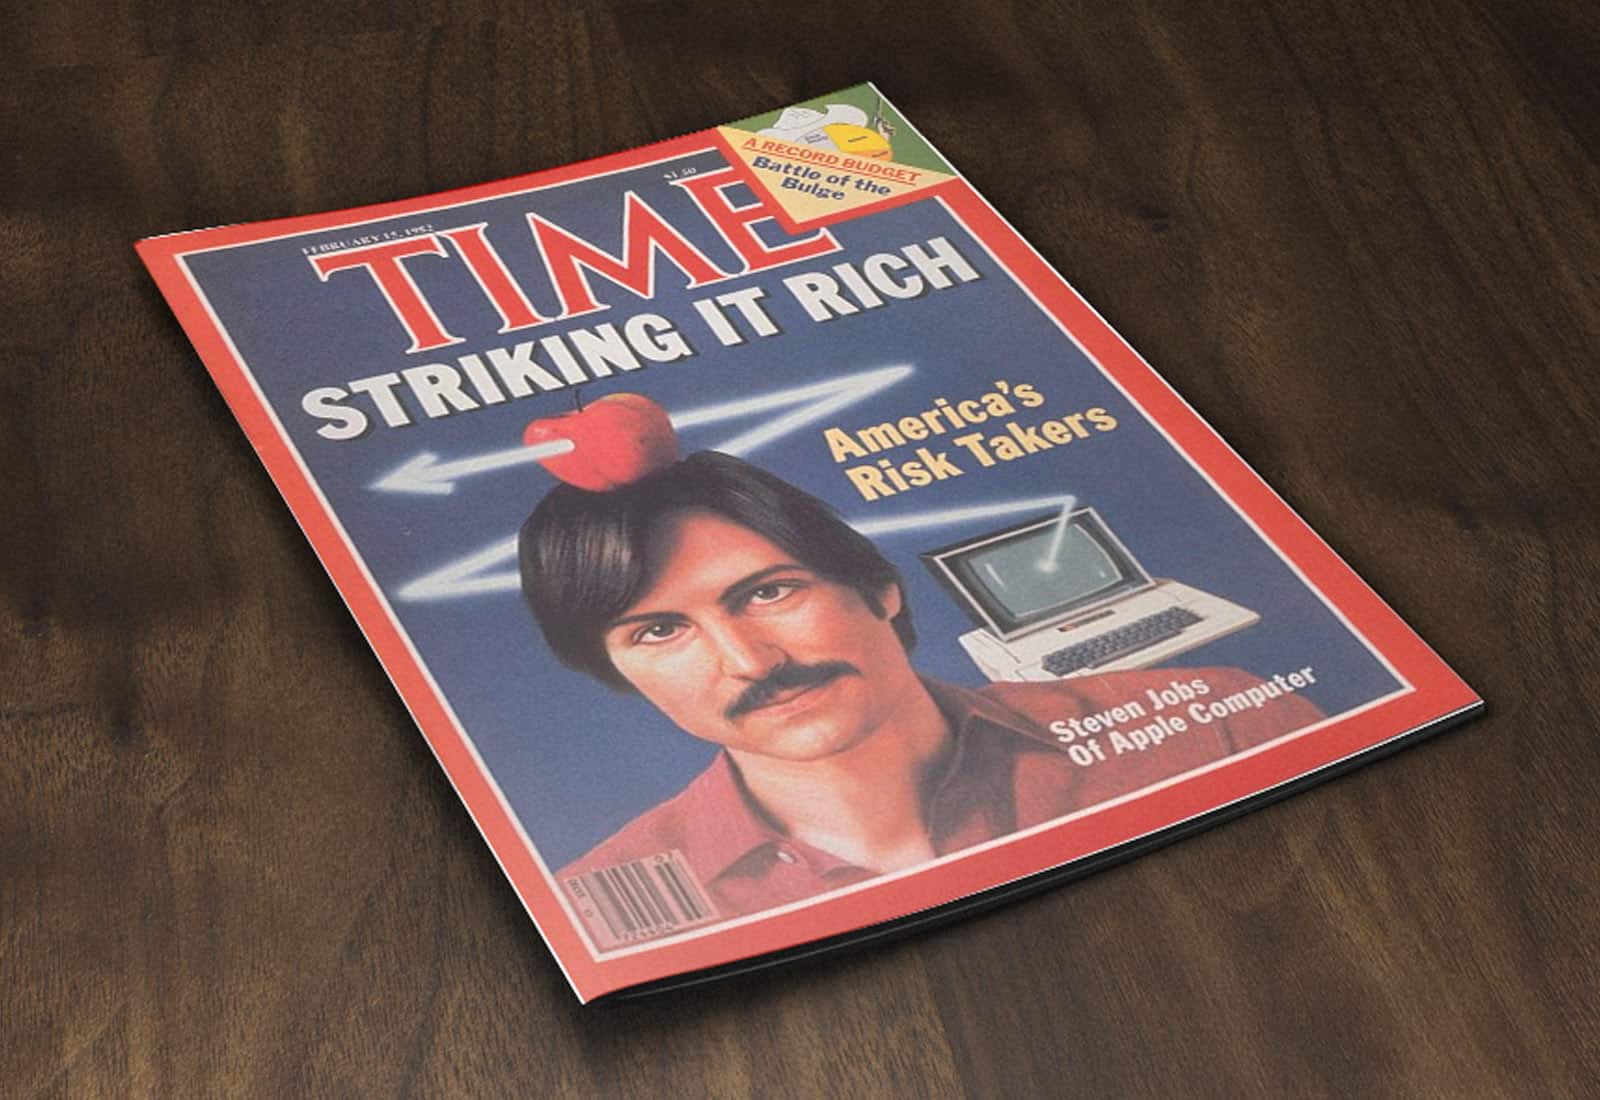 With Steve Jobs first Time magazine cover, he becomes the face of the 1980s tech boom.